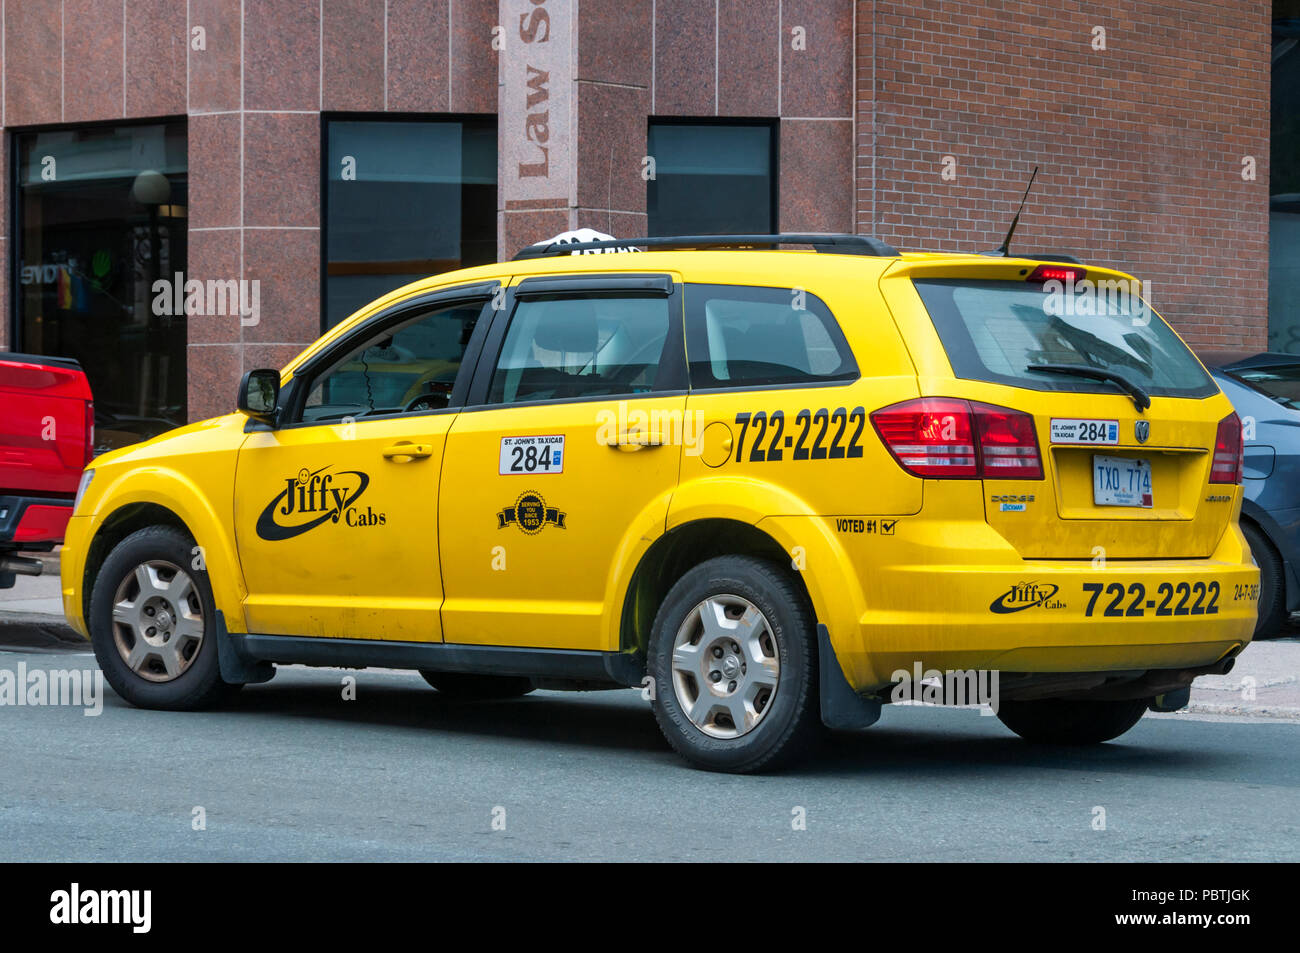 Jiffy cabs hires stock photography and images Alamy